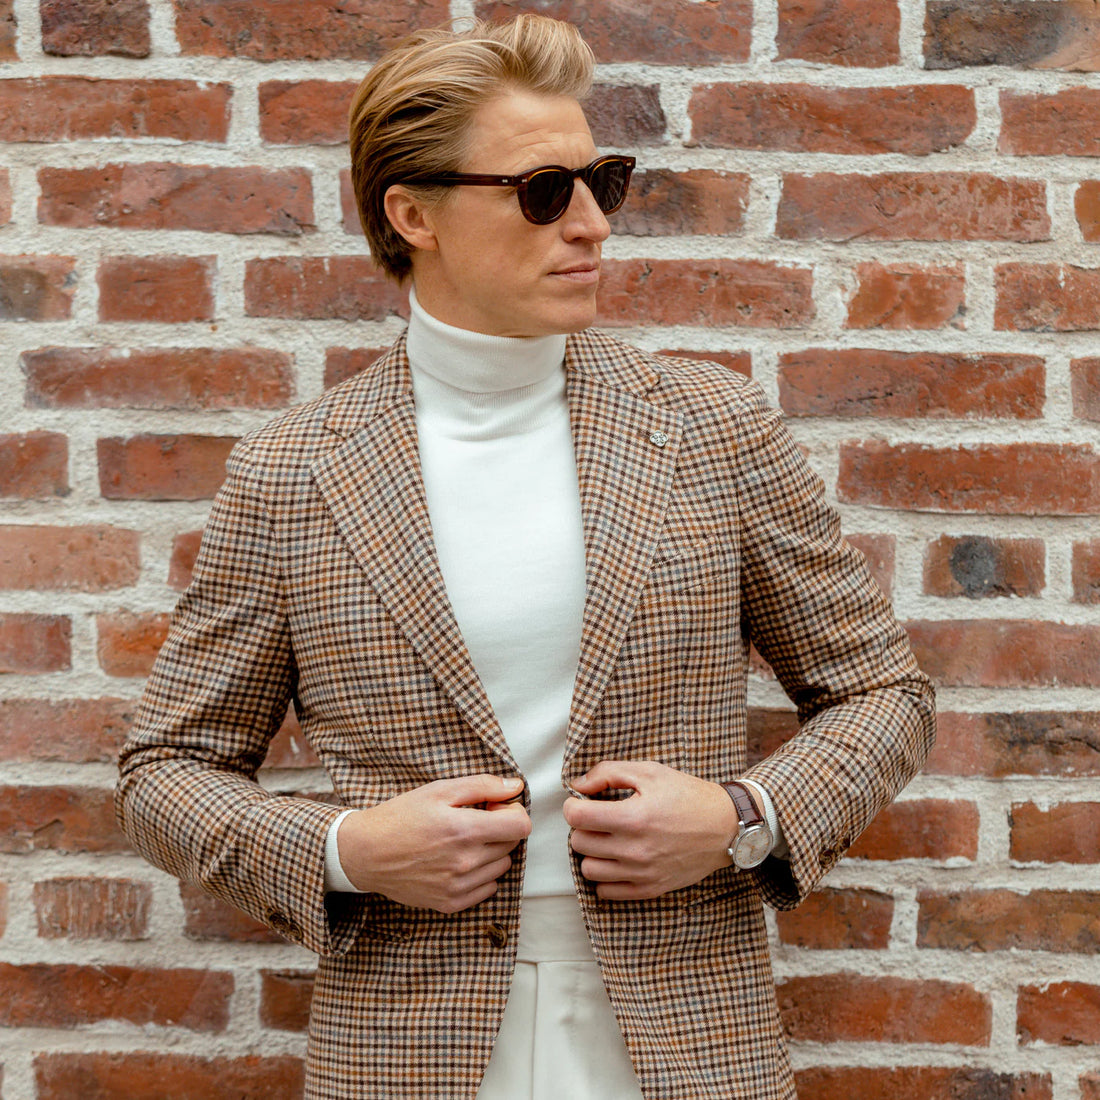 A person in a plaid jacket and turtleneck standing in front of a brick wall.